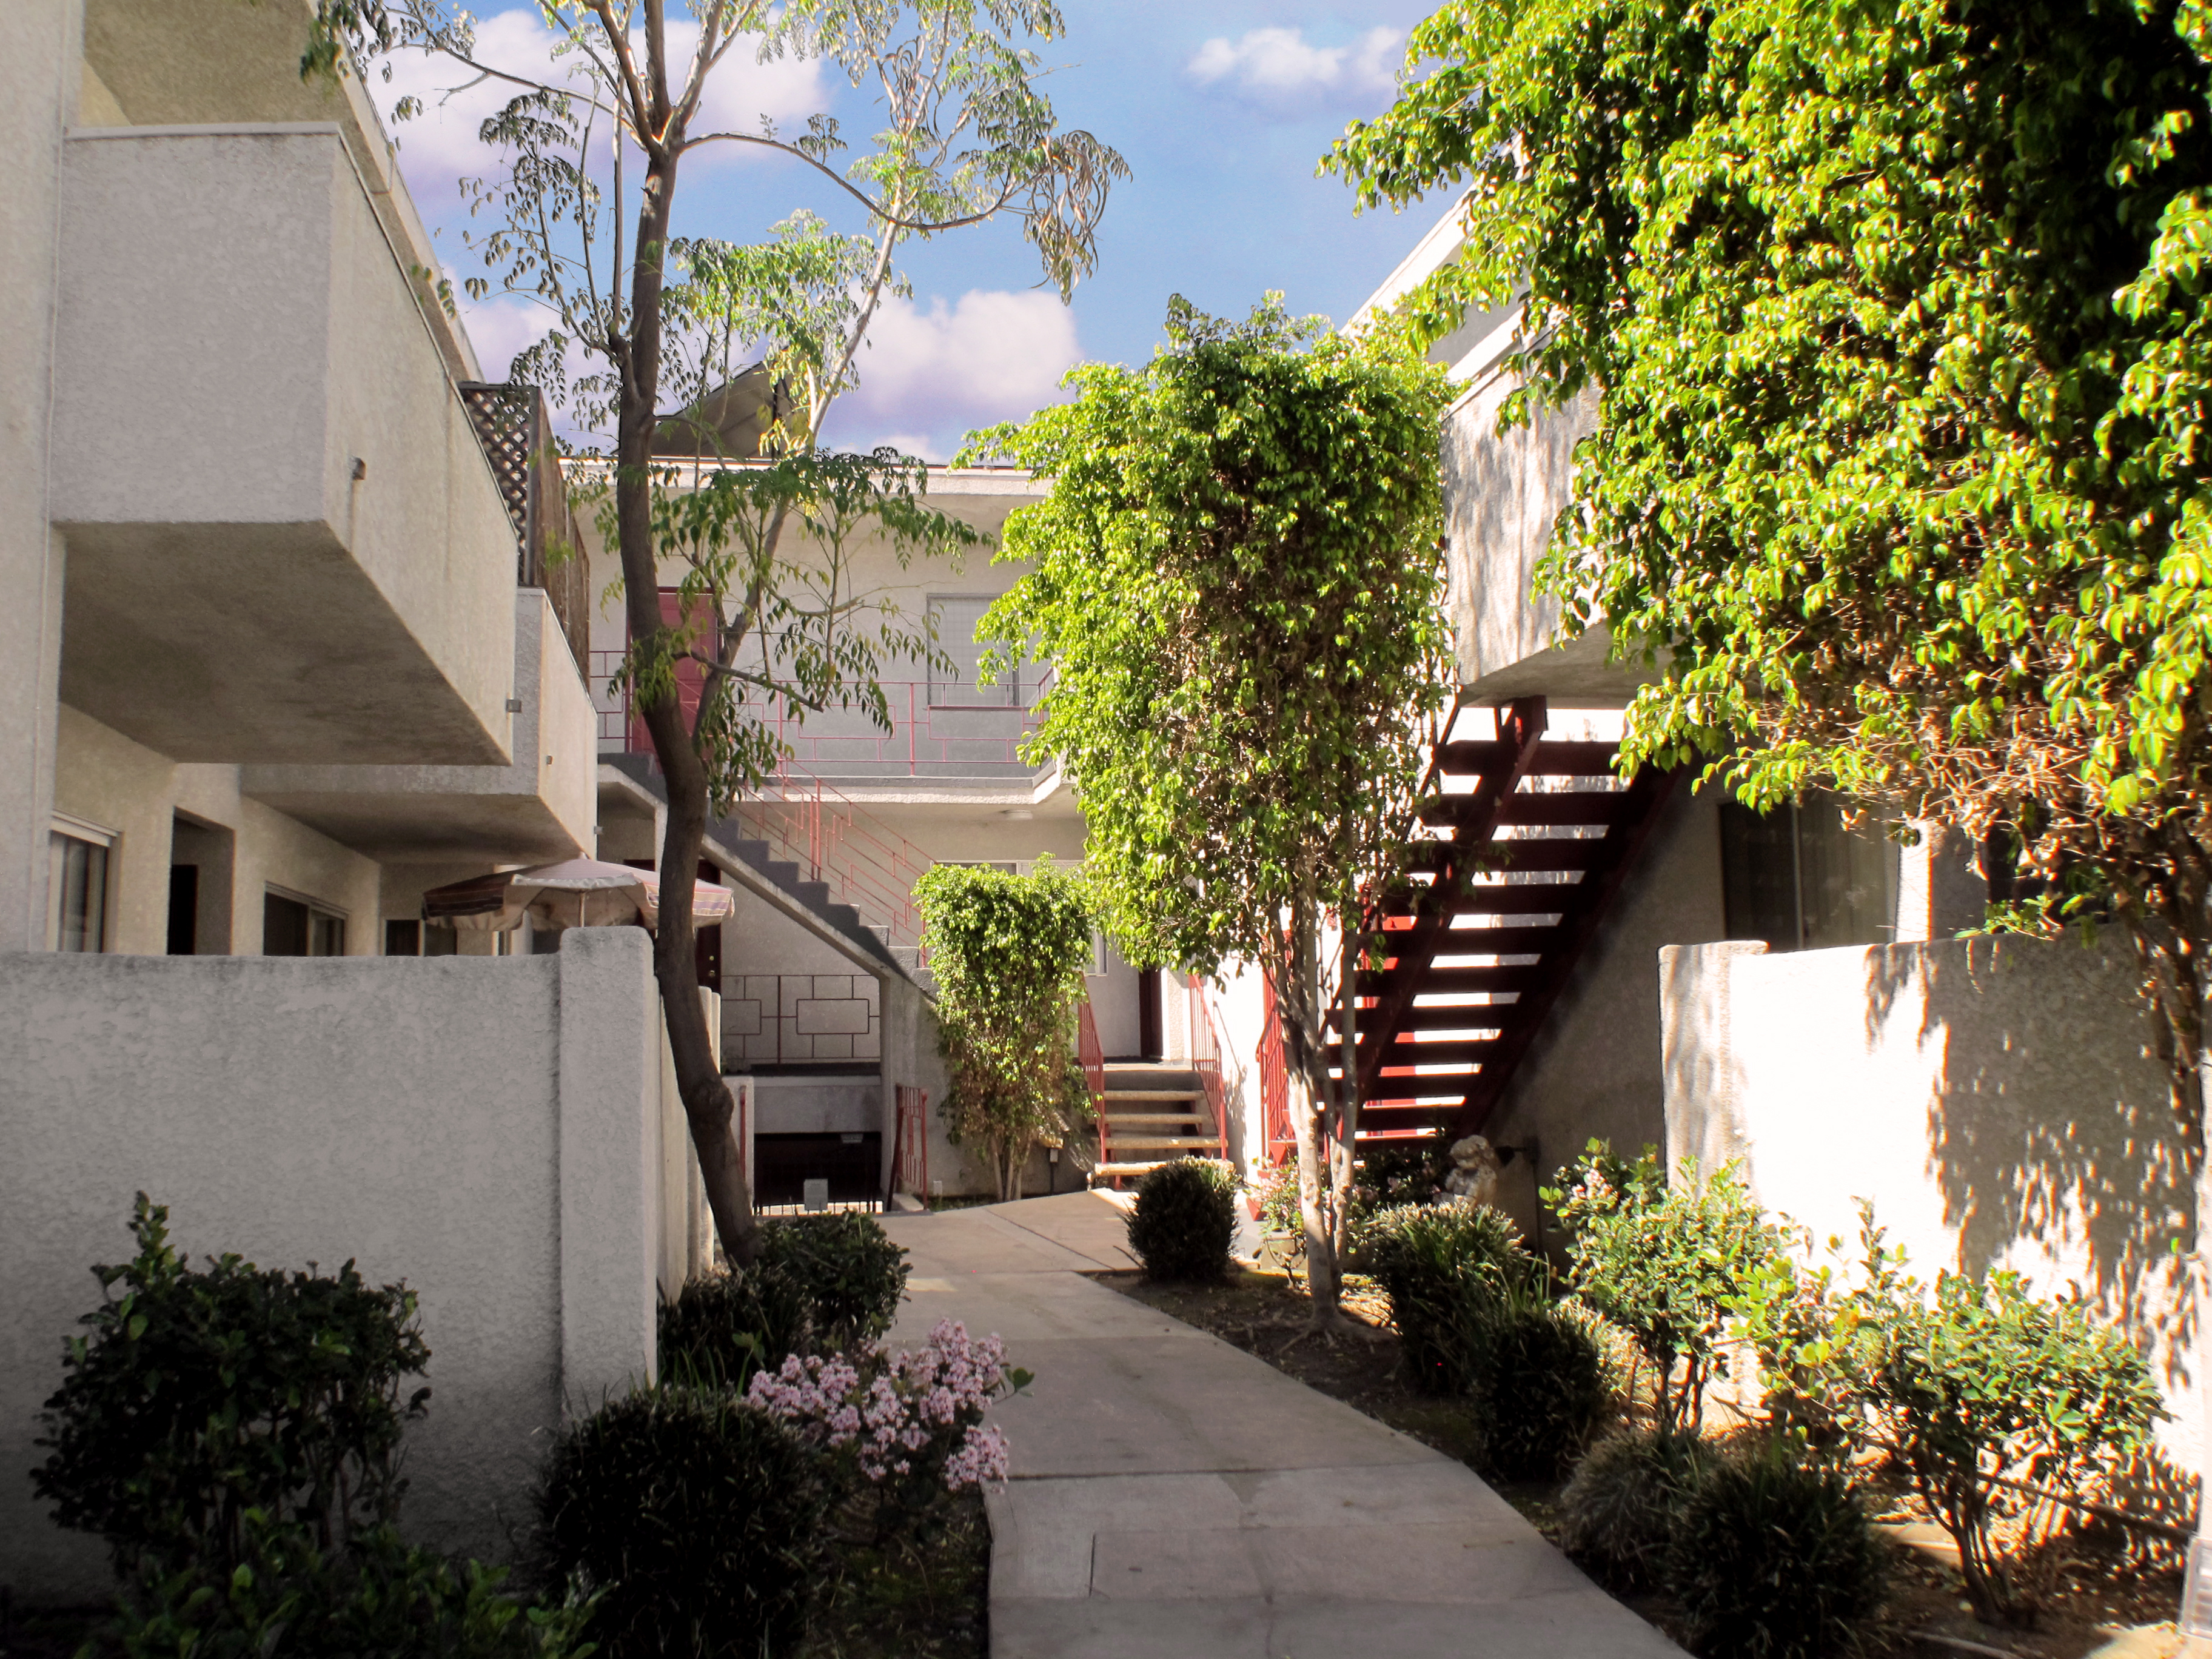 Courtyard of a two story white building. There's a passageway with plants and trees on the sides. There are staircases with handle bars and balconies visible.